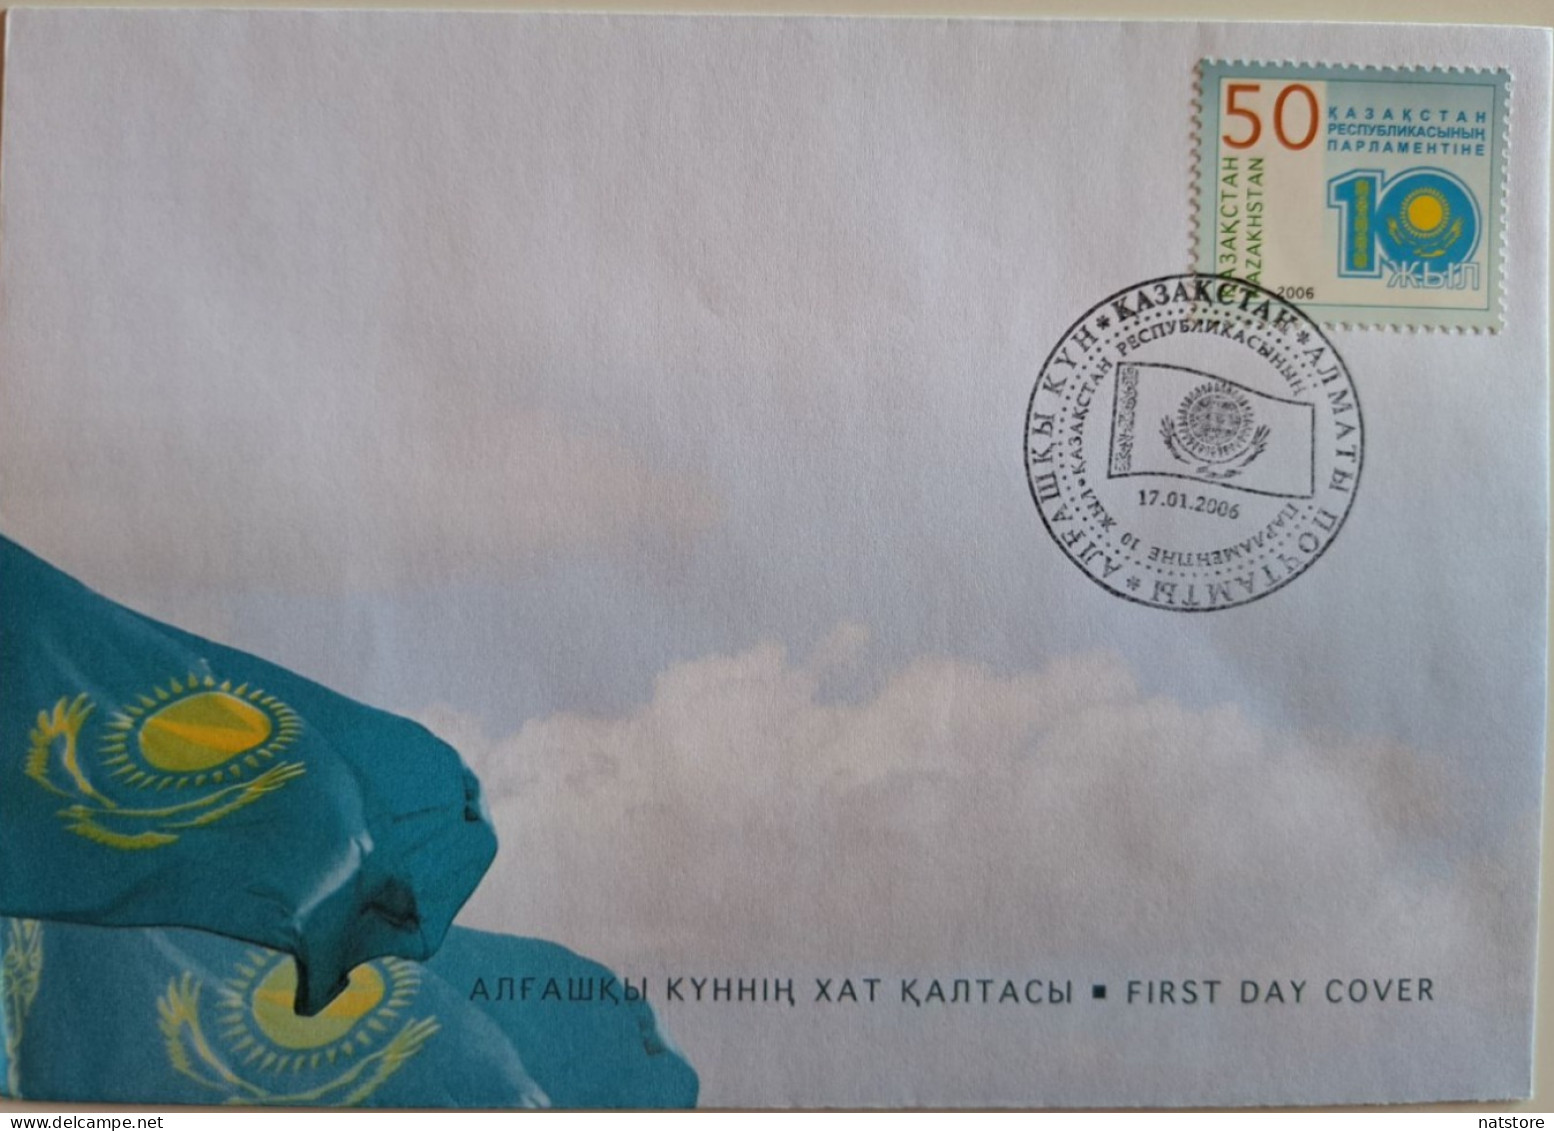 2006..KAZAKHSTAN...FDC WITH  STAMP...NEW..The 10th Anniversary Of Parliament Of Republic Of Kazakhstan..RARE!!! - Enveloppes